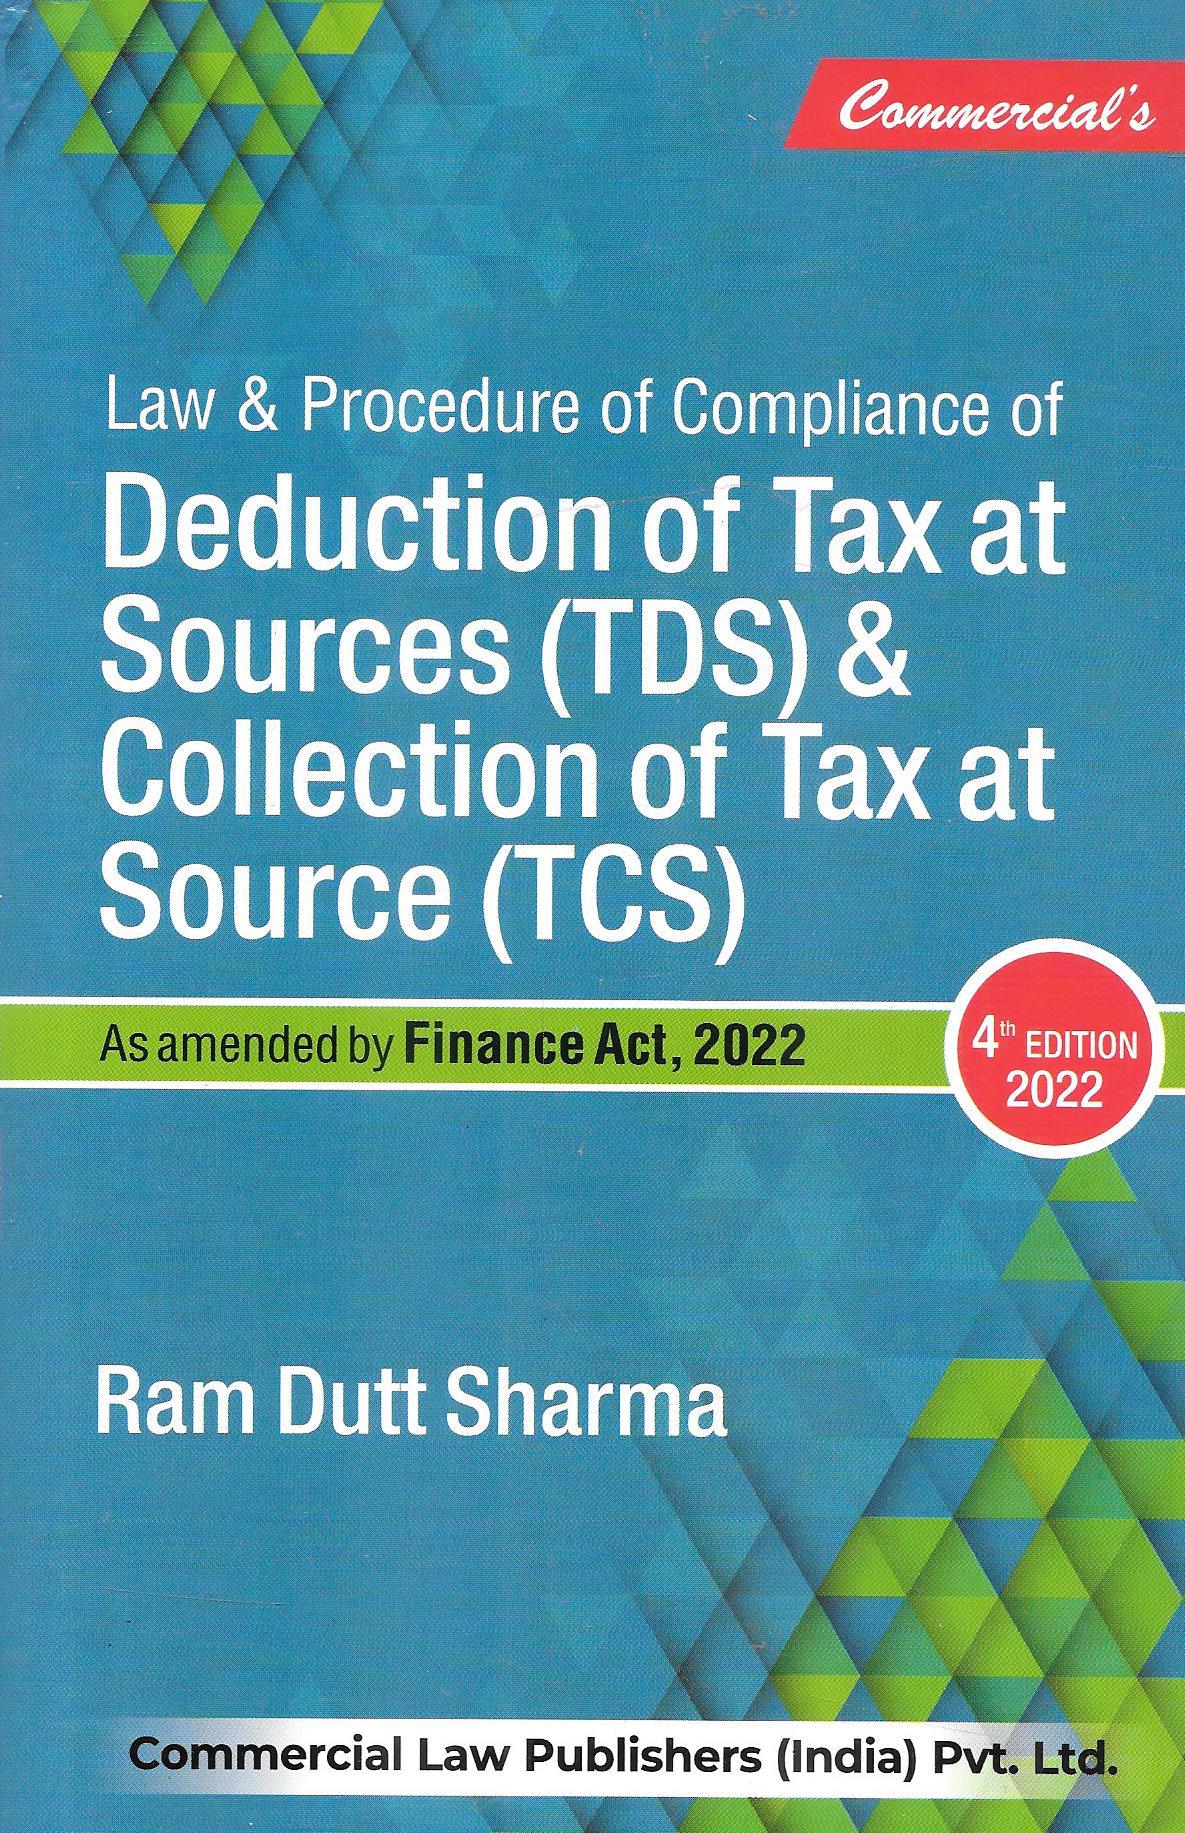 Law & Procedure Of Compliance Of Deduction Of Tax At Sources (TDS) & Collection Of Tax At Source(TCS)